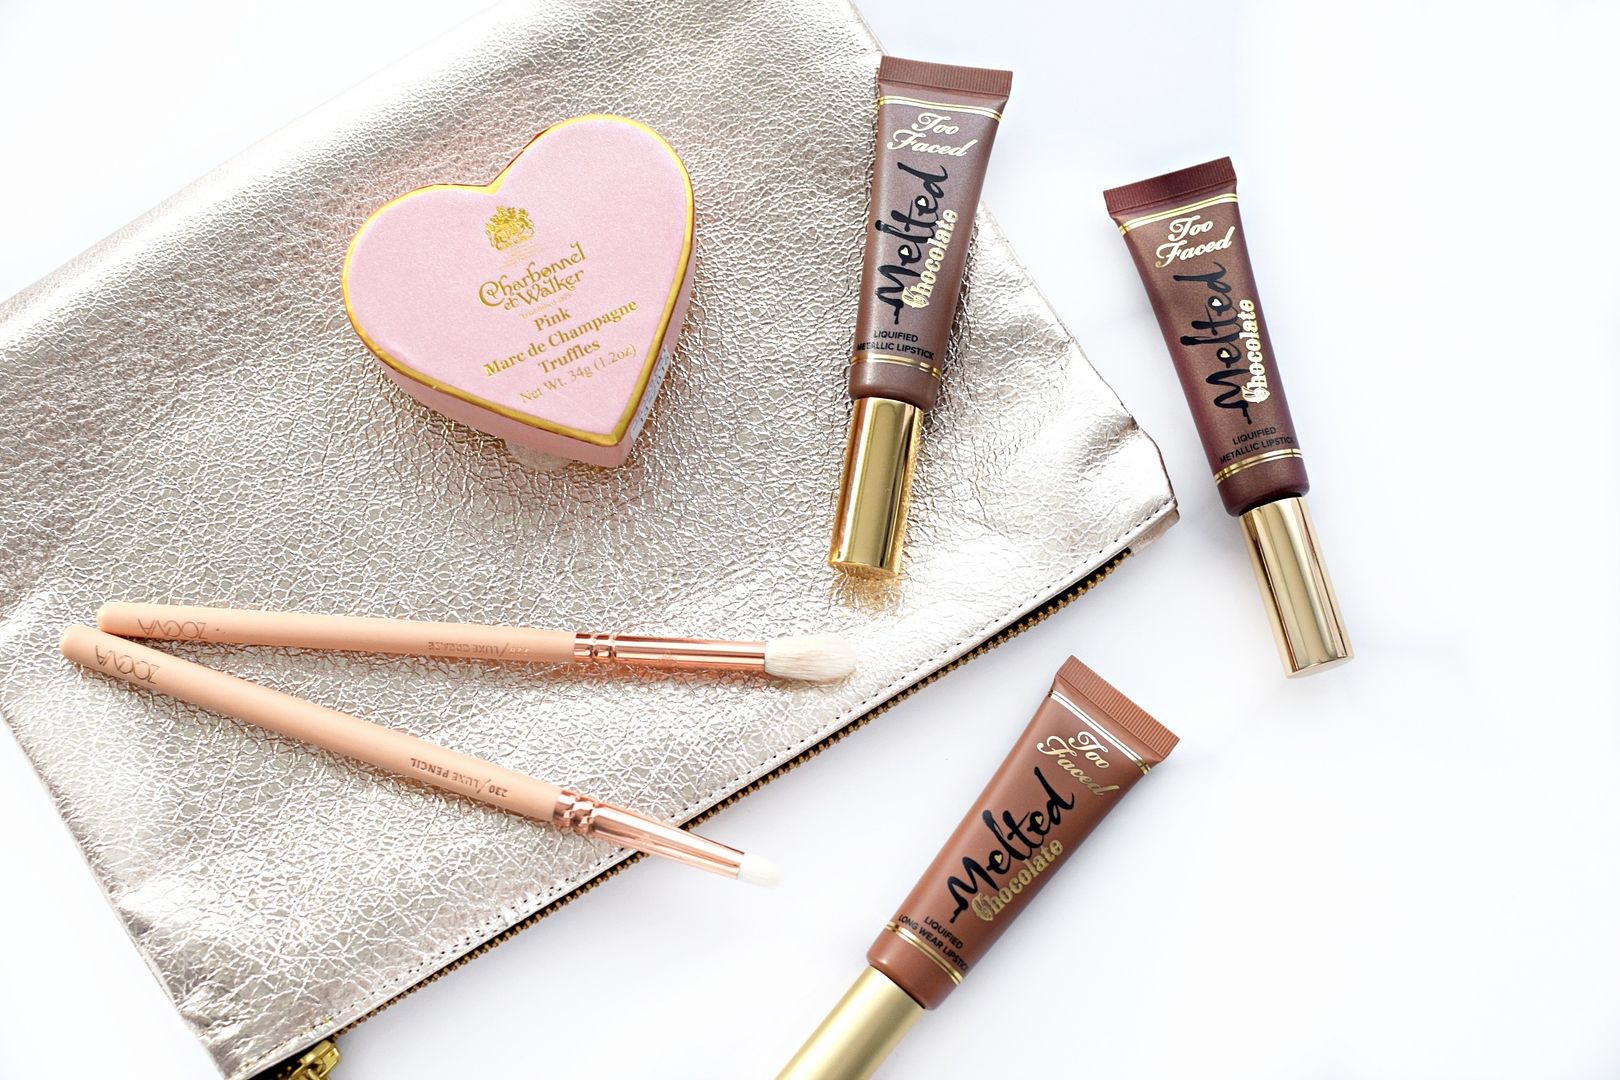 Too Faced Melted Chocolate Liquid Lipsticks Review | UK Beauty Blog